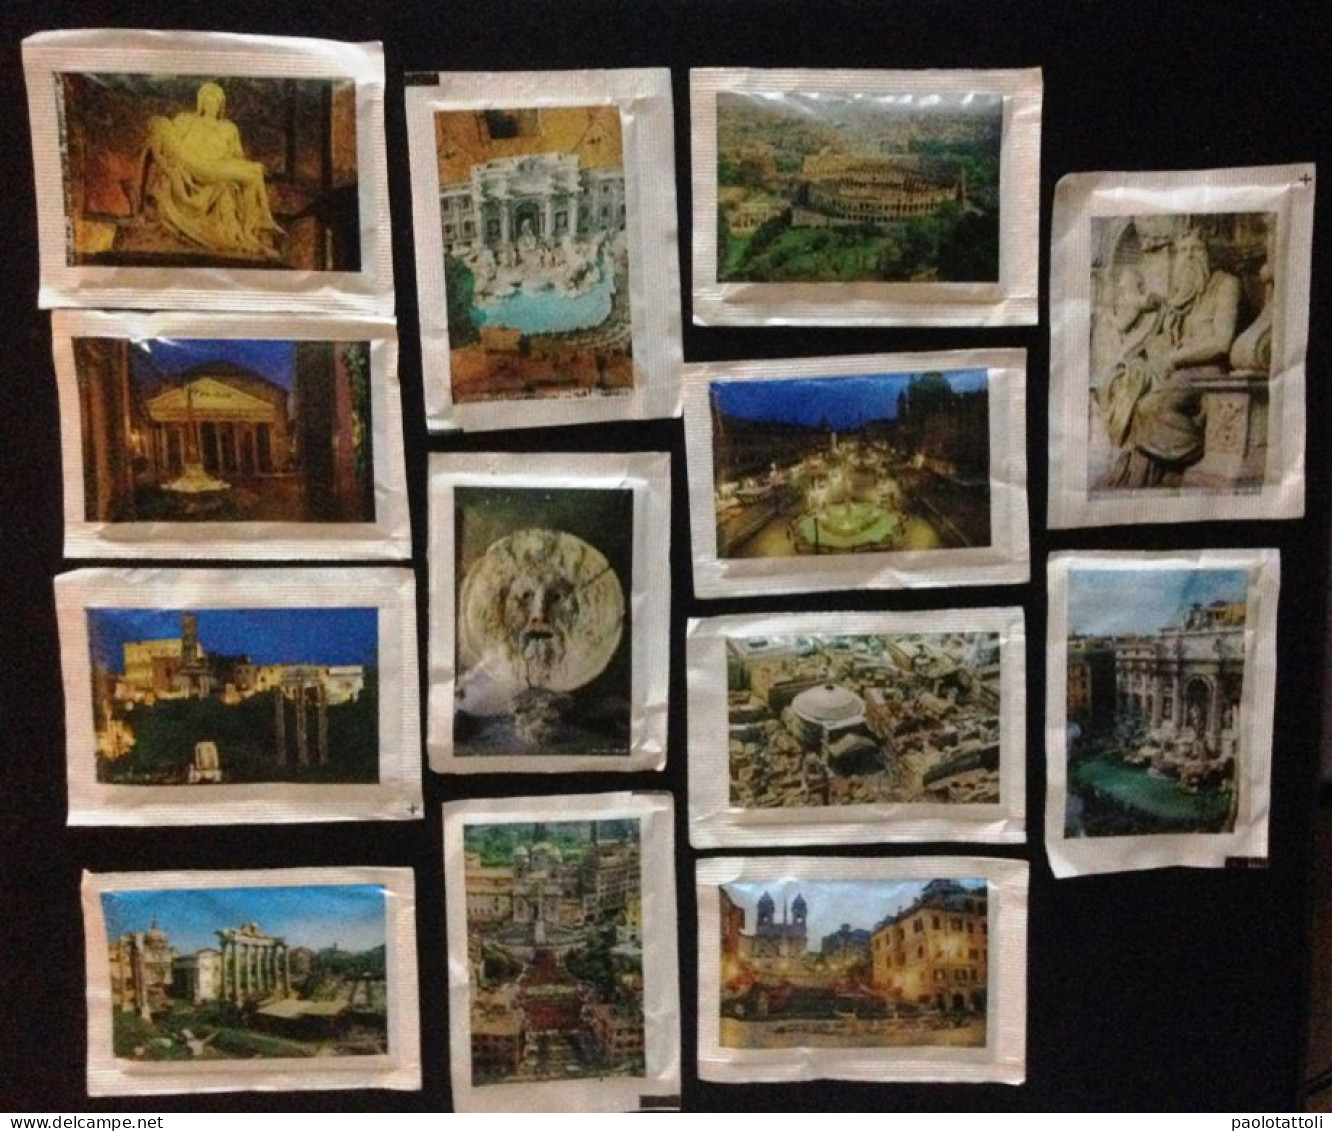 Sugar Bag, Bustine Zucchero, Full- Monumenti Roma. Lot Of 12 Bags. Packed By SAC.ROM. - Sucres